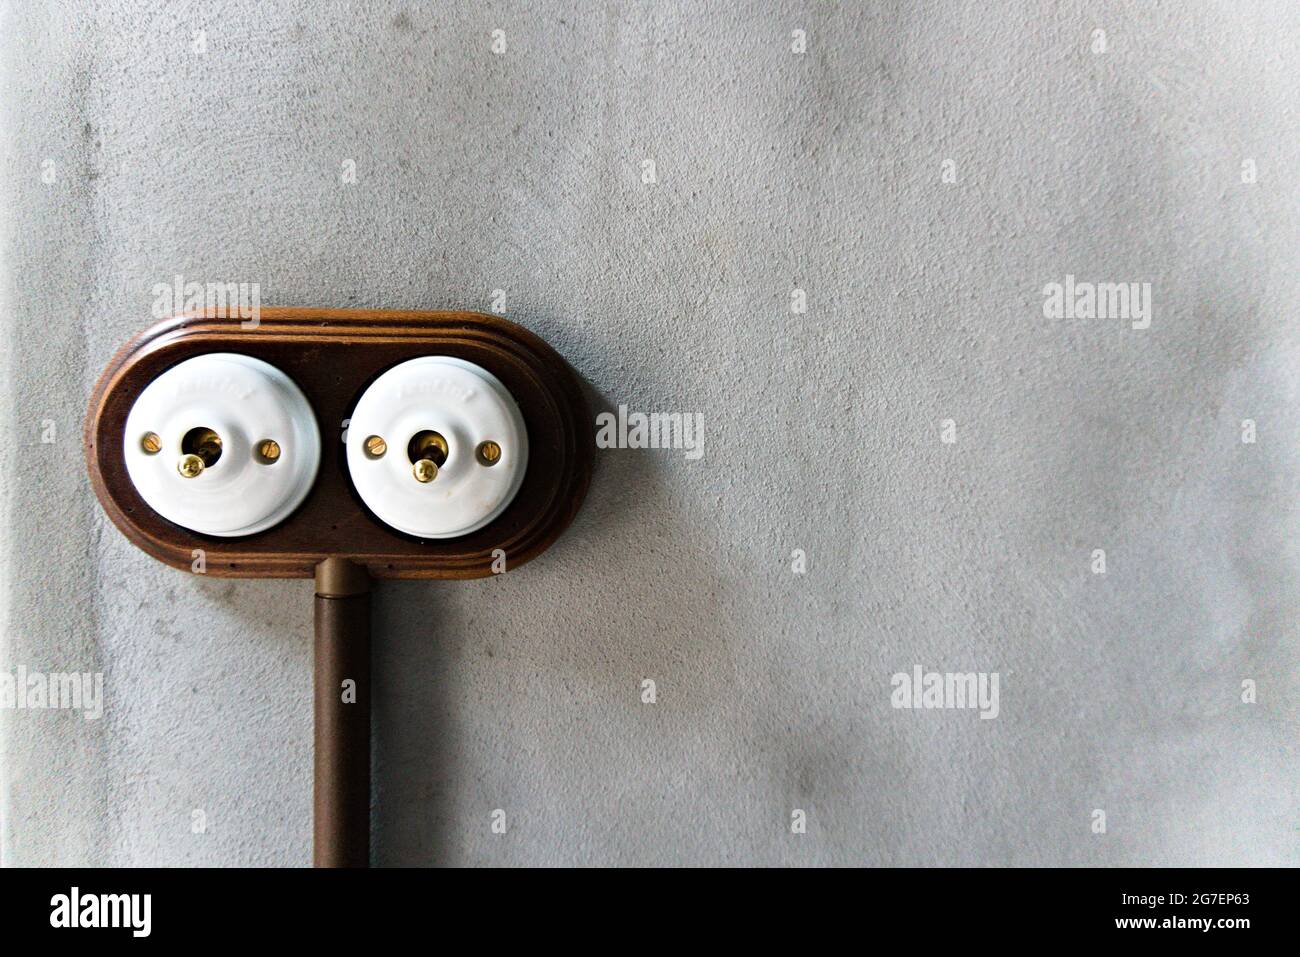 Two vintage light switches on a concrete wall Stock Photo